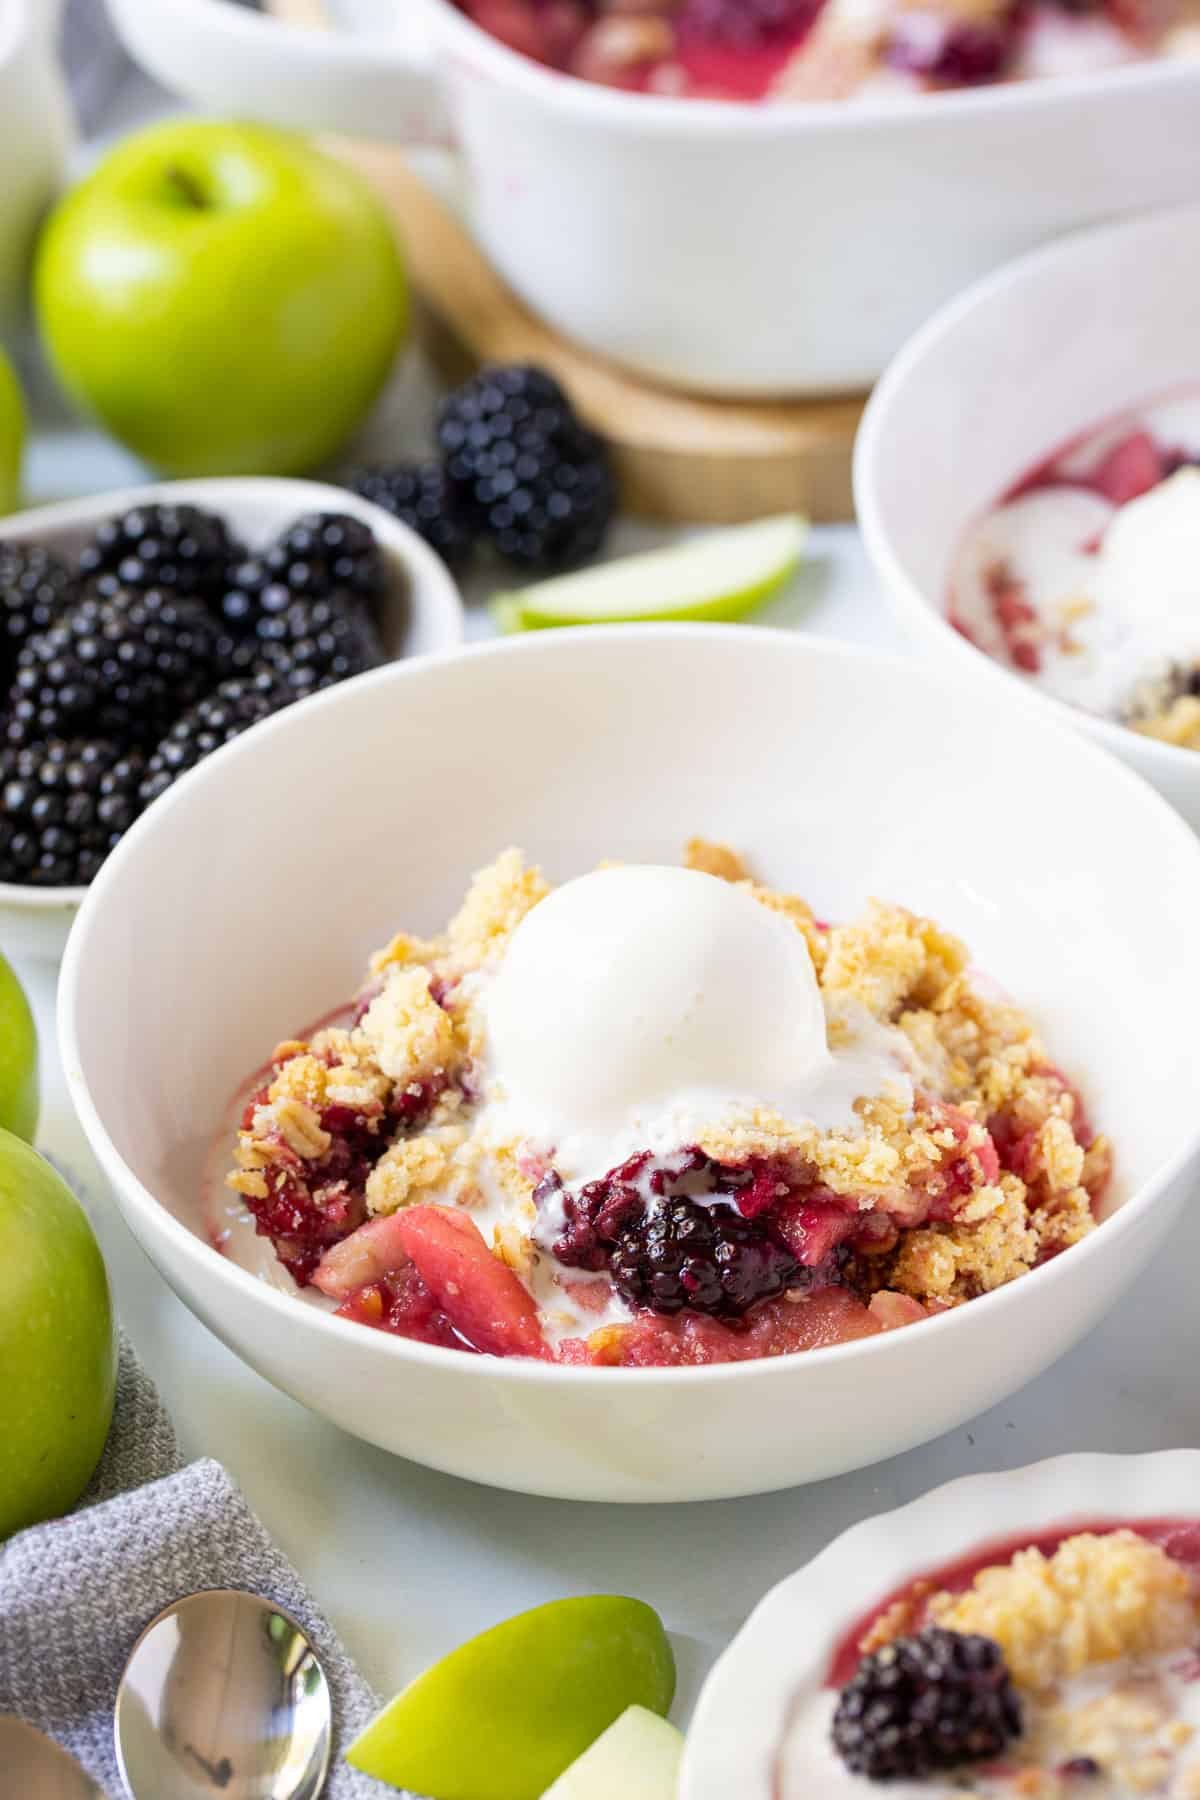 apple and blackberry crumble in a white bowl, topped with ice cream.